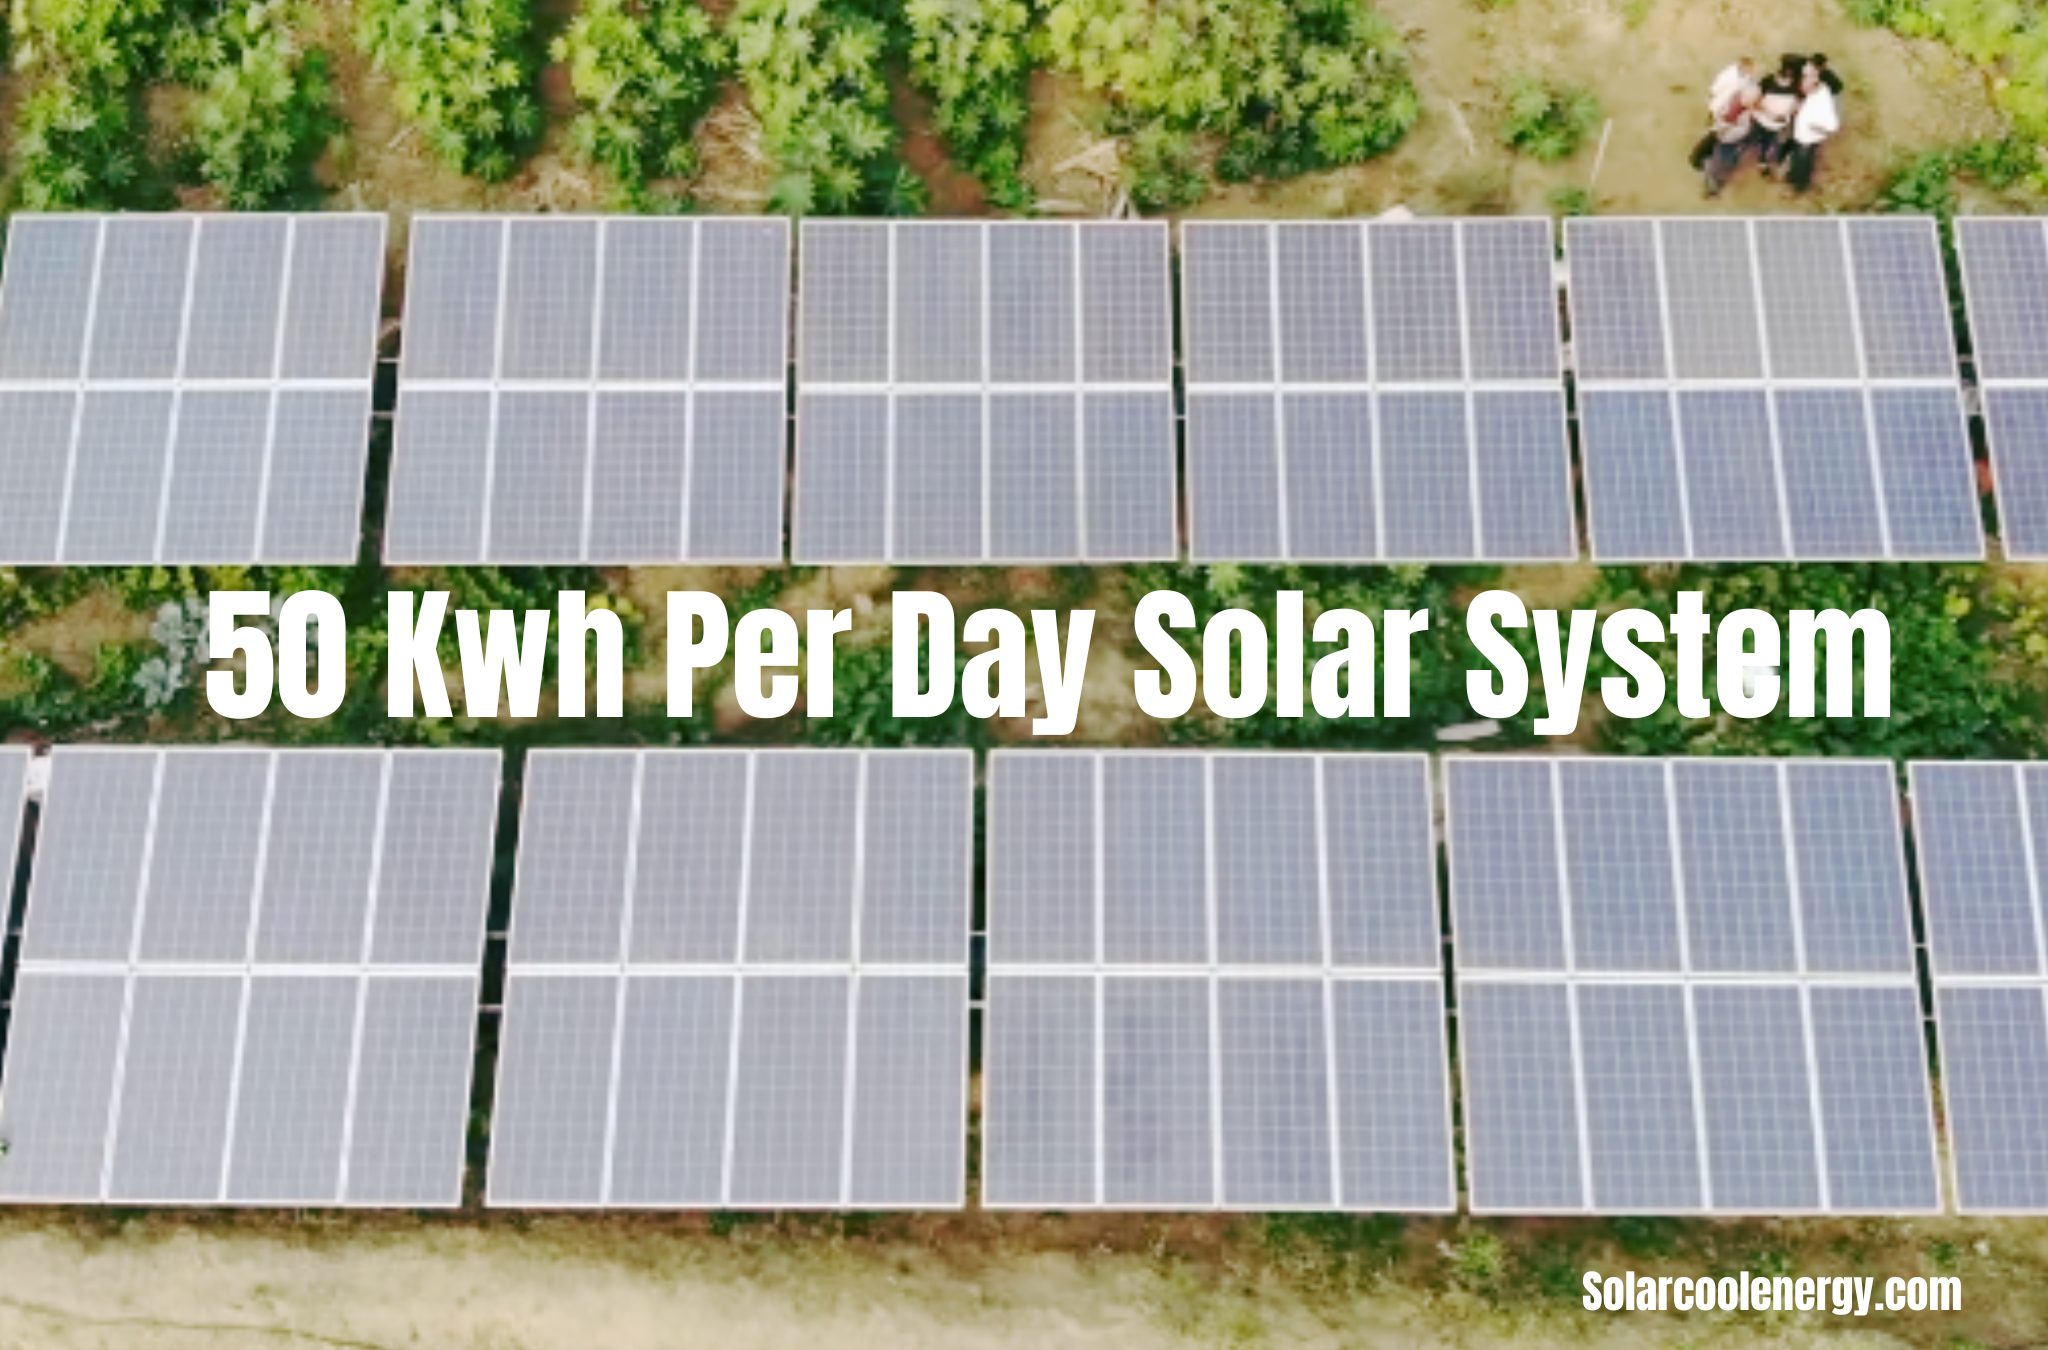 50 Kwh Per Day Solar System